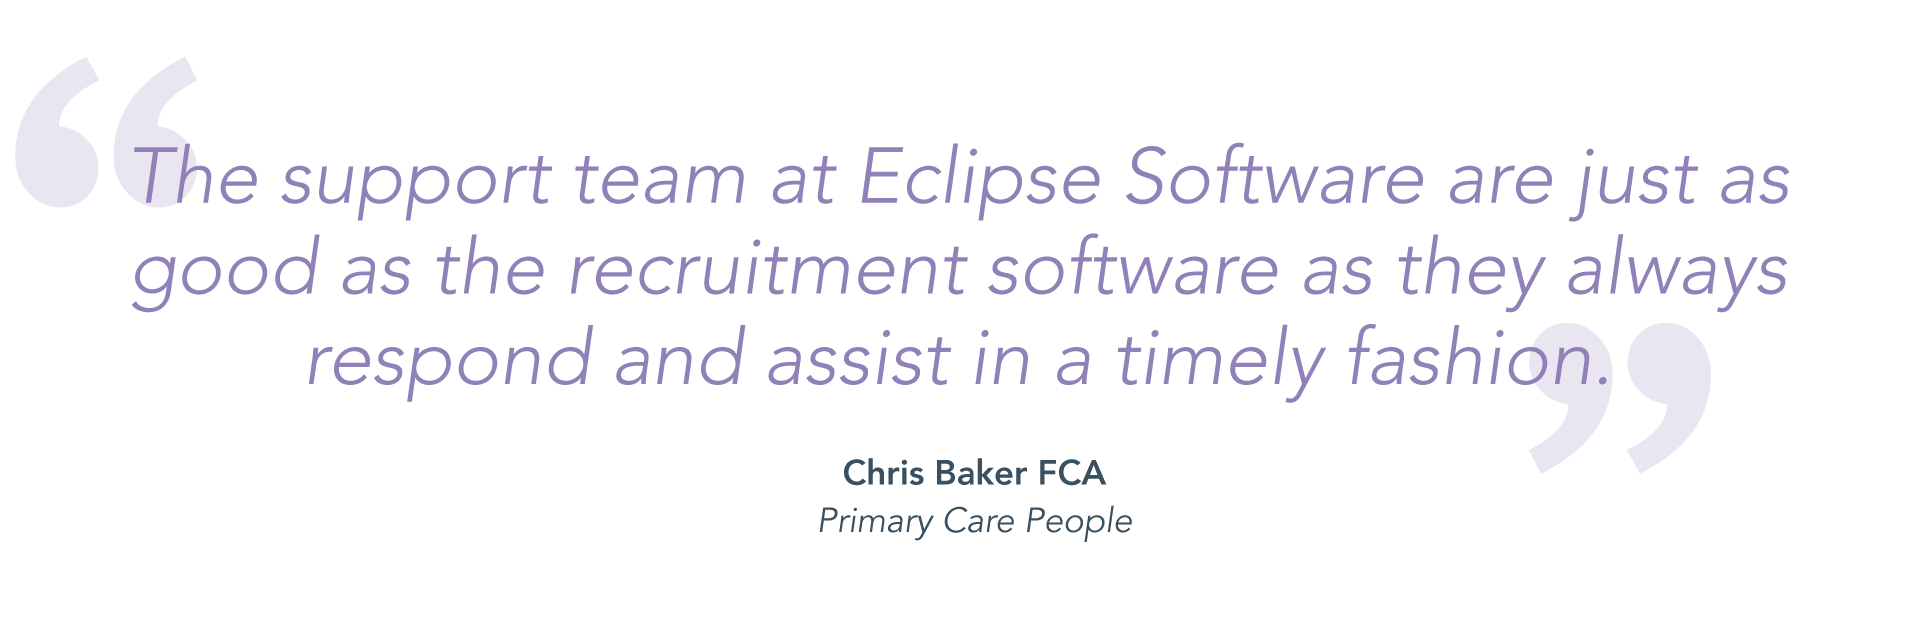 "The support team at Eclipse Software are just as good as teh recruitment software as they always respond and assist in a timely fashion." - Chris Baker FCA, Primary Care People.